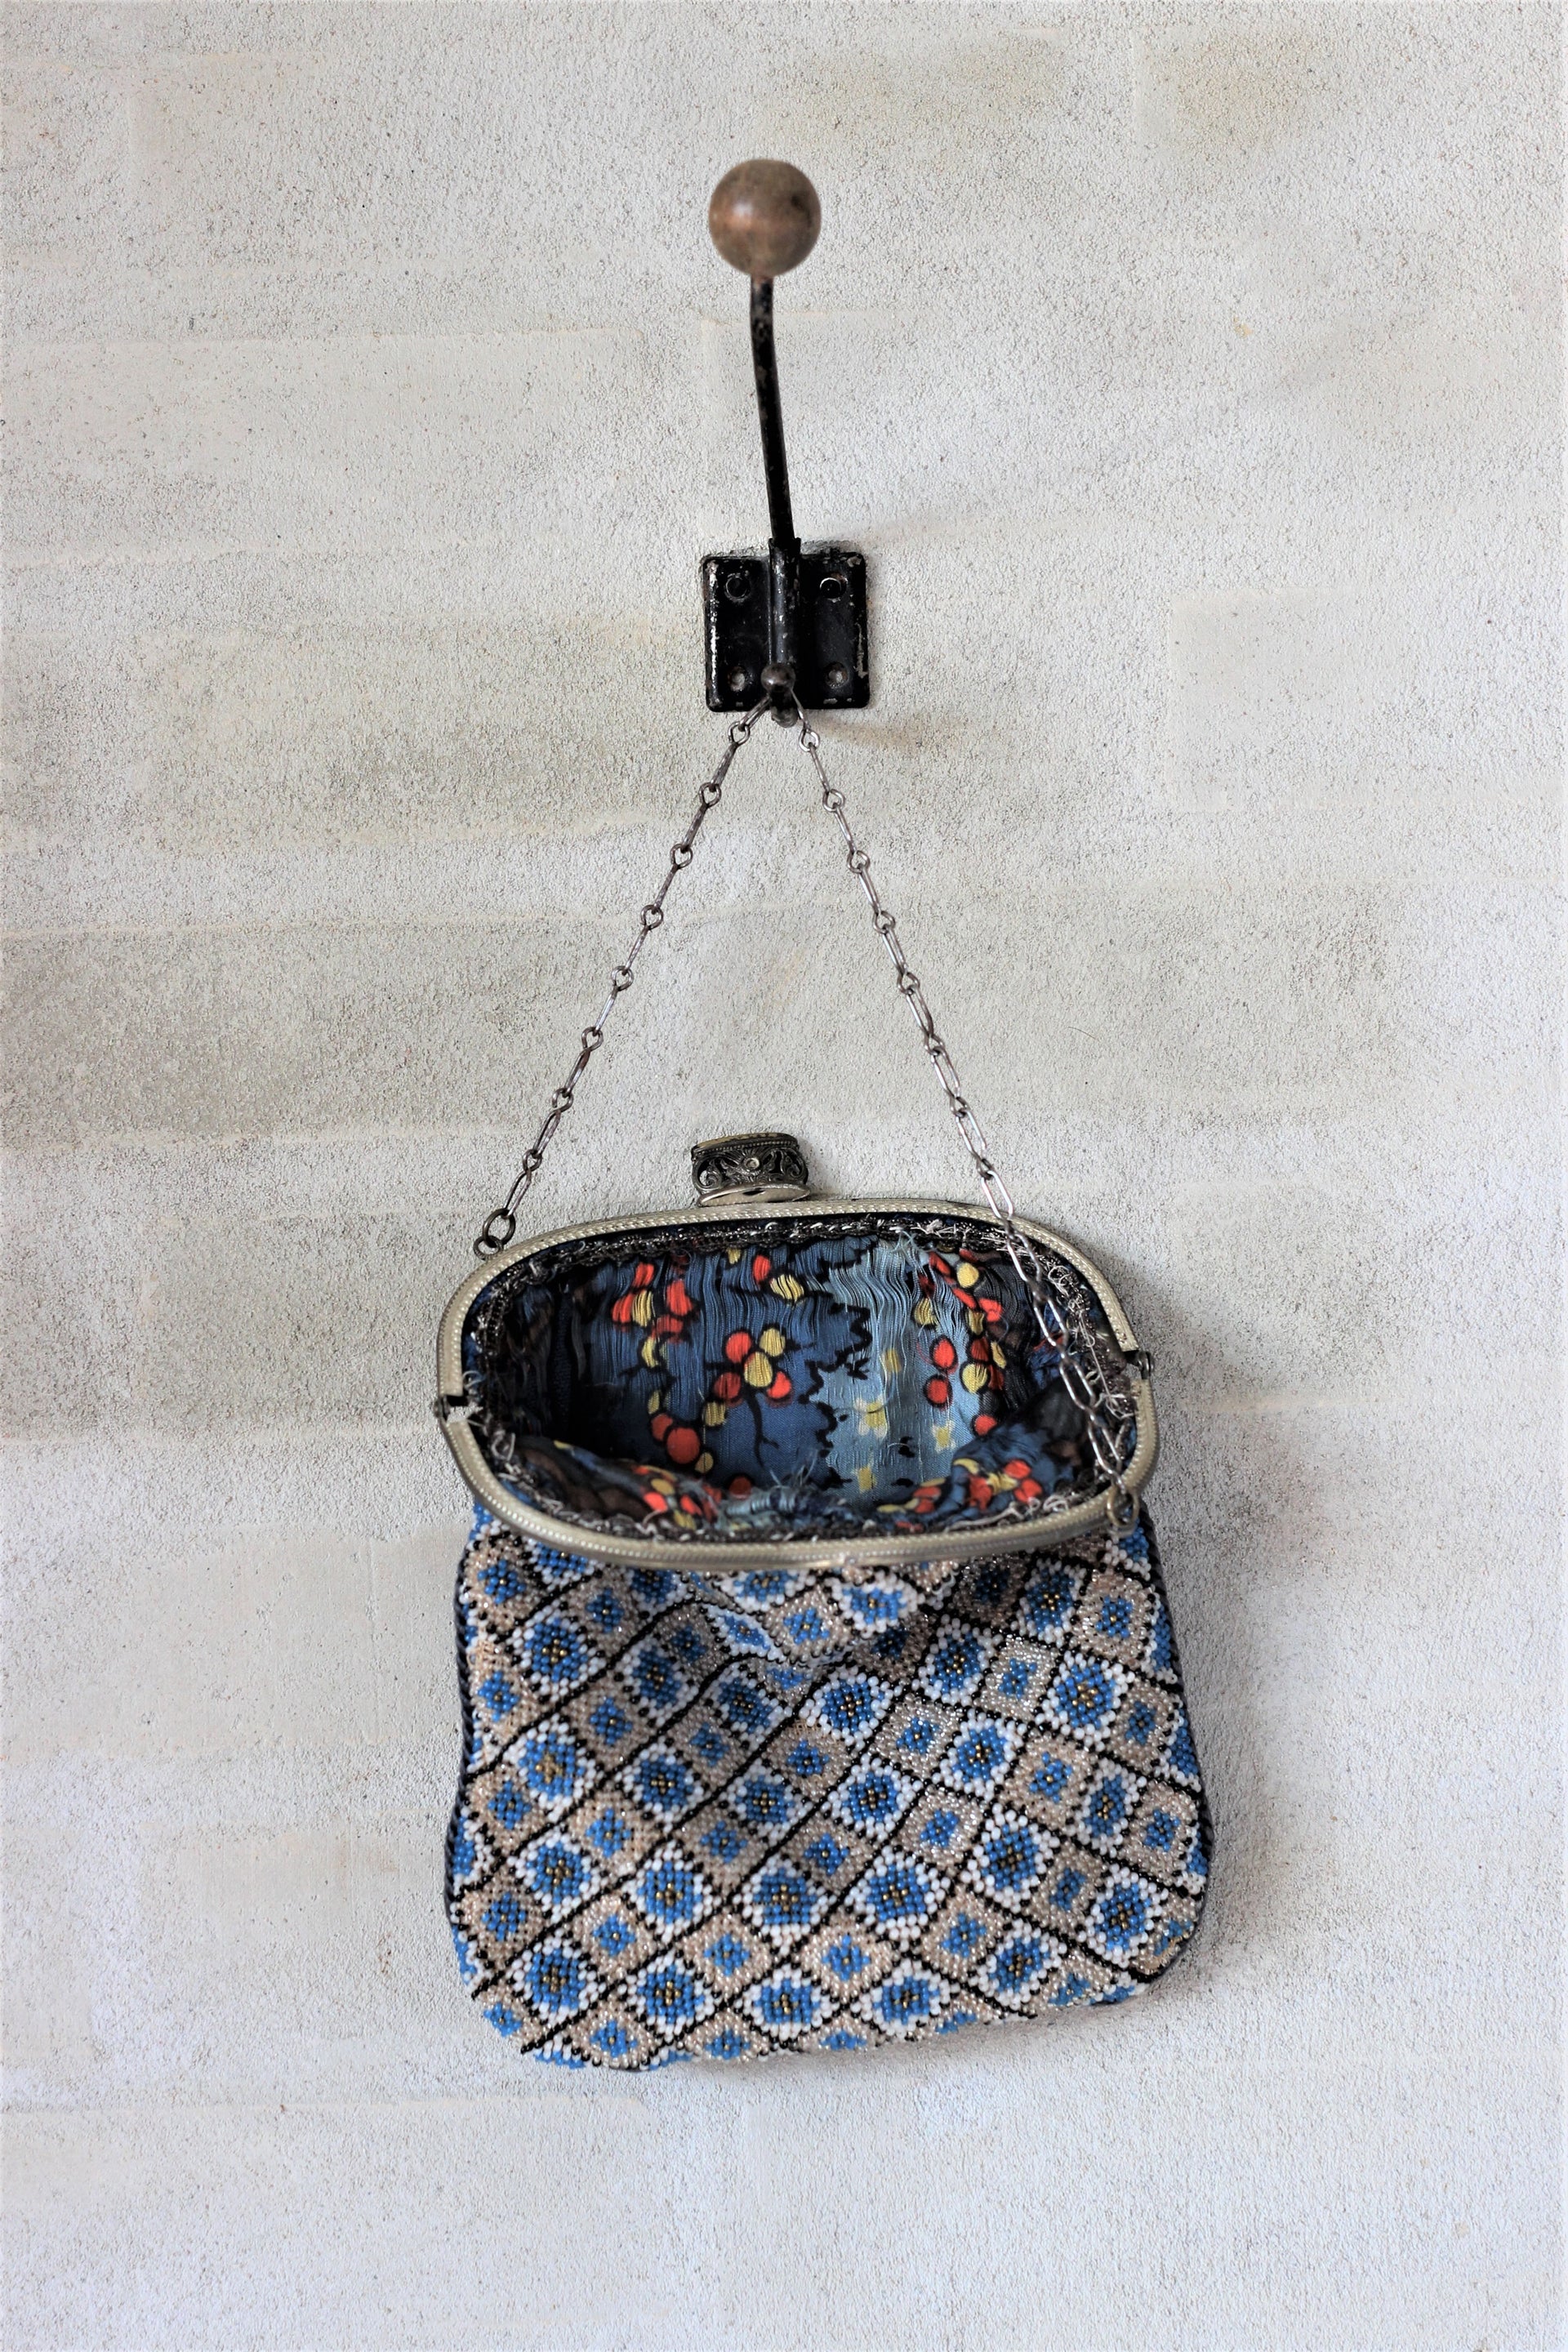 1920s-1930s Vintage Bag With Blue and White Beads